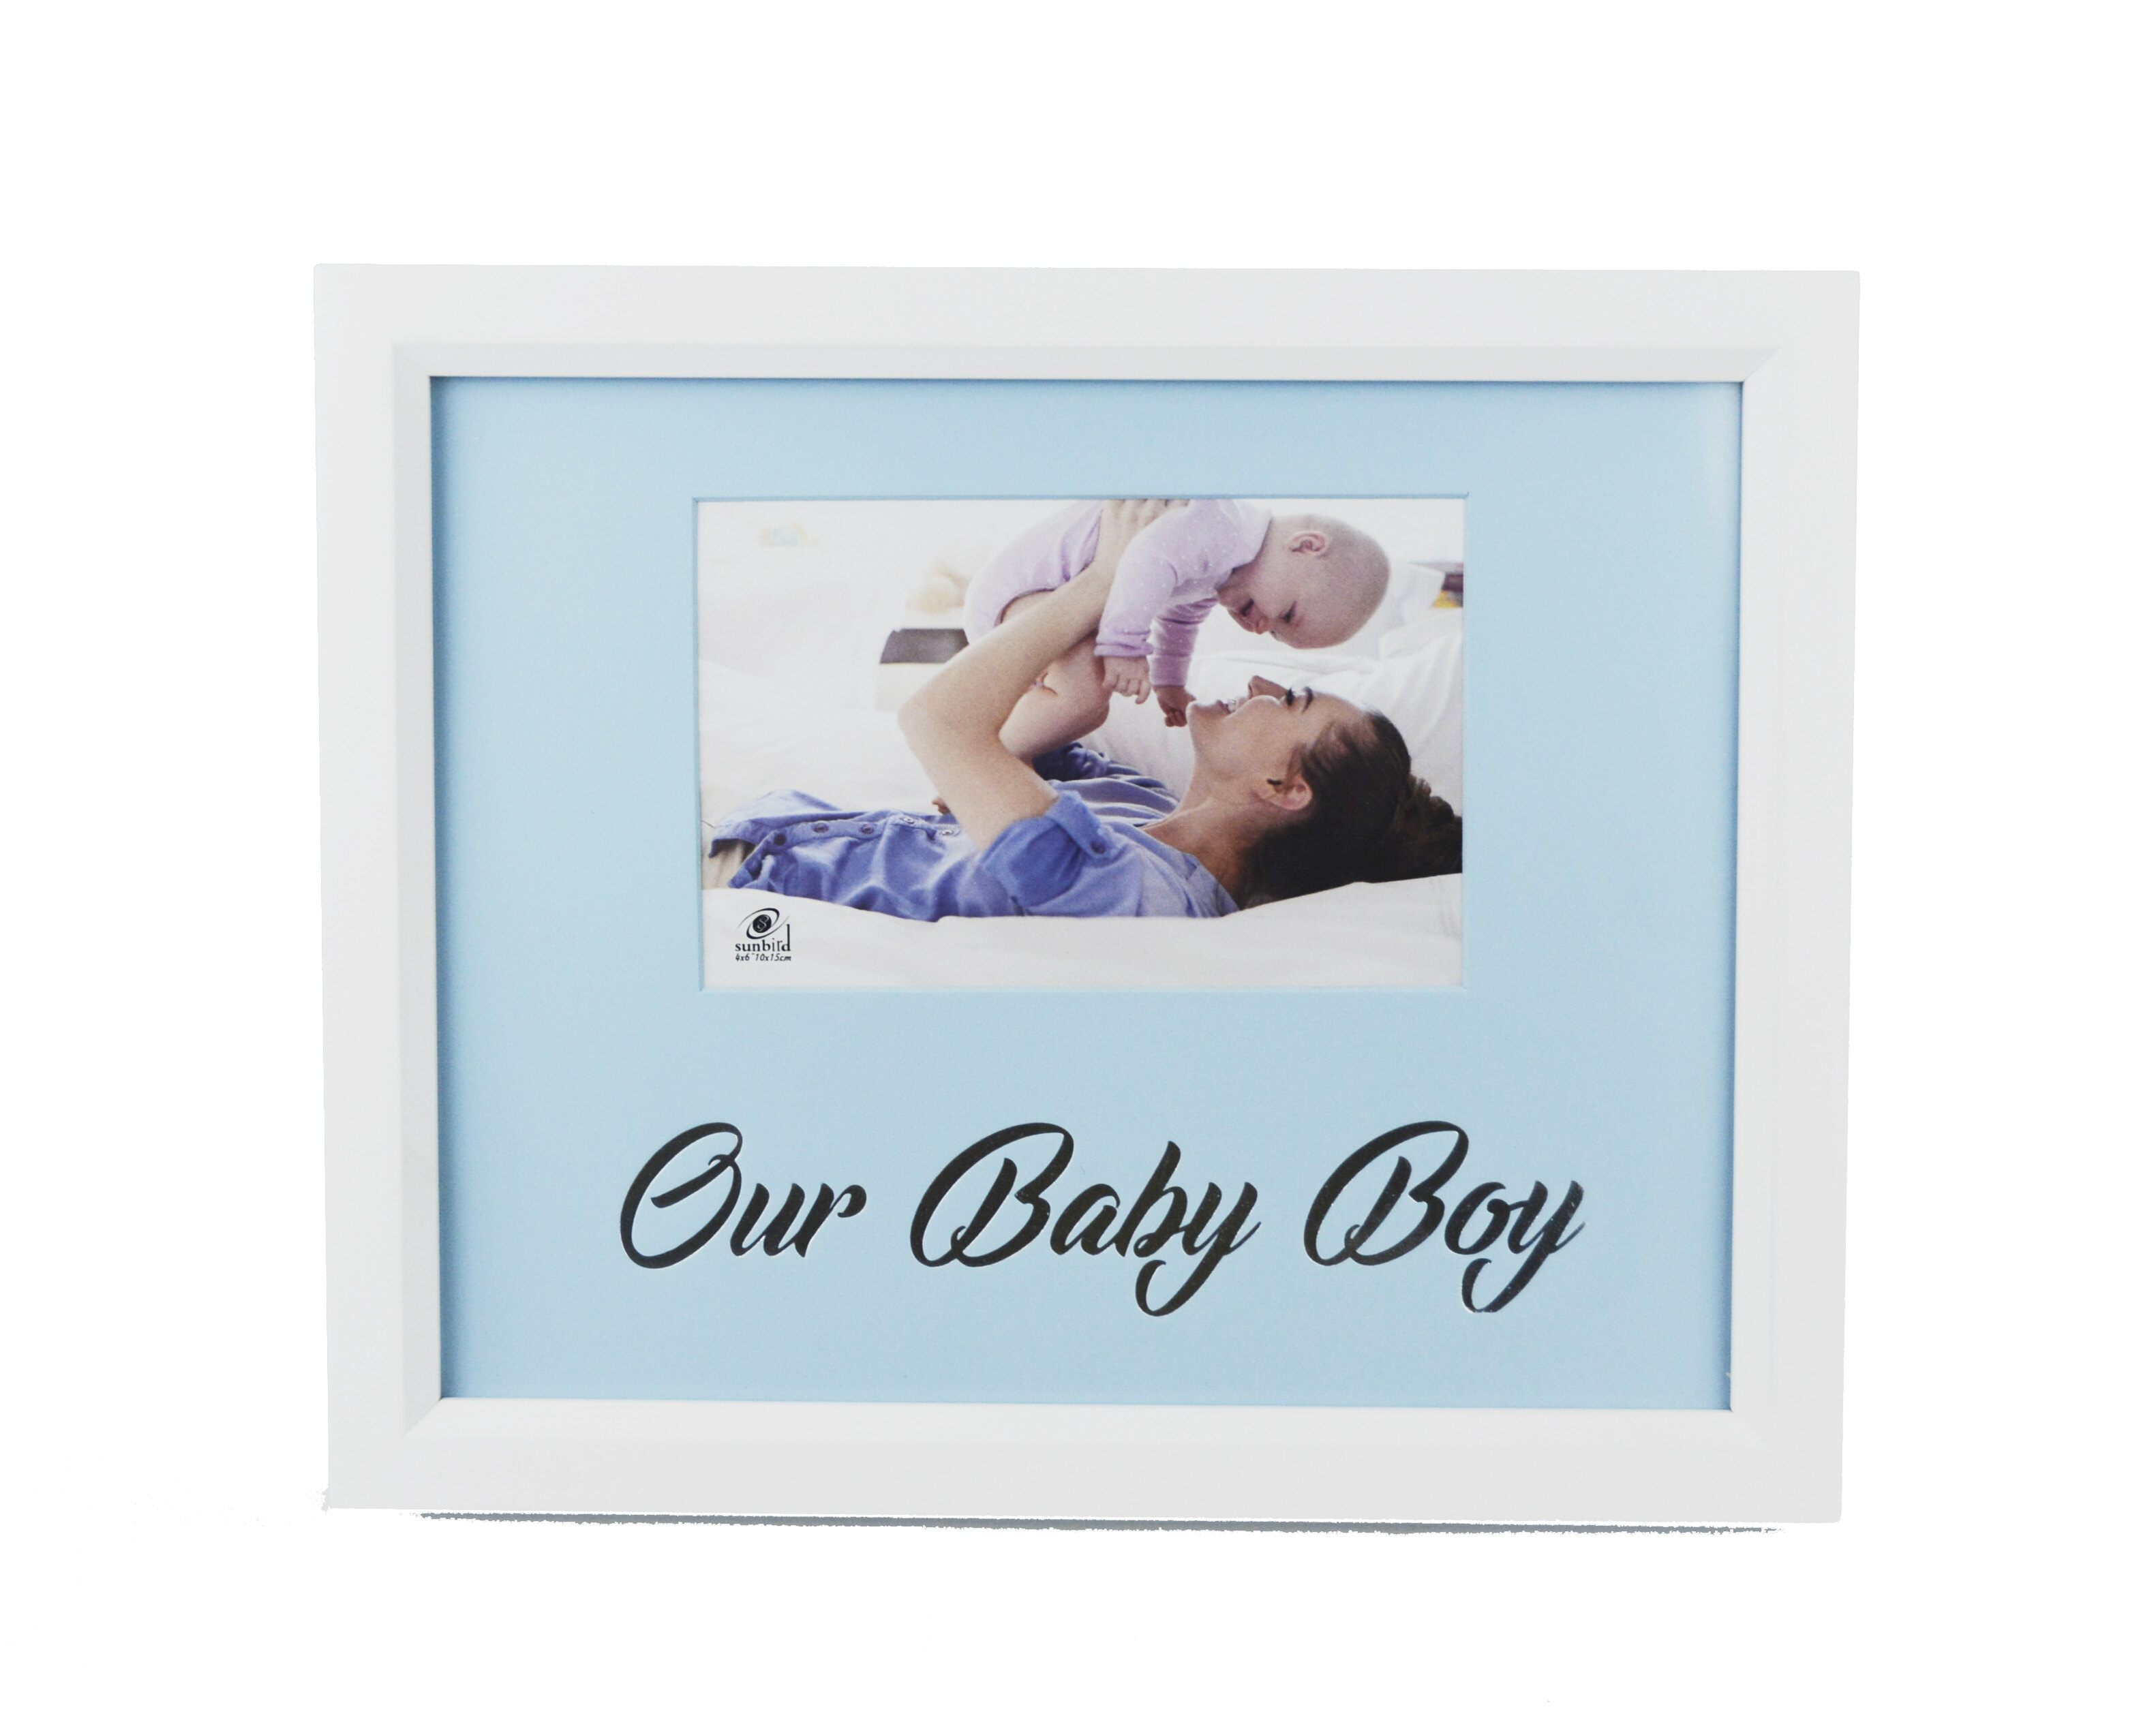 Our baby boy new born blue 4x6" wooden photo frame with foil silver fonts celebrities